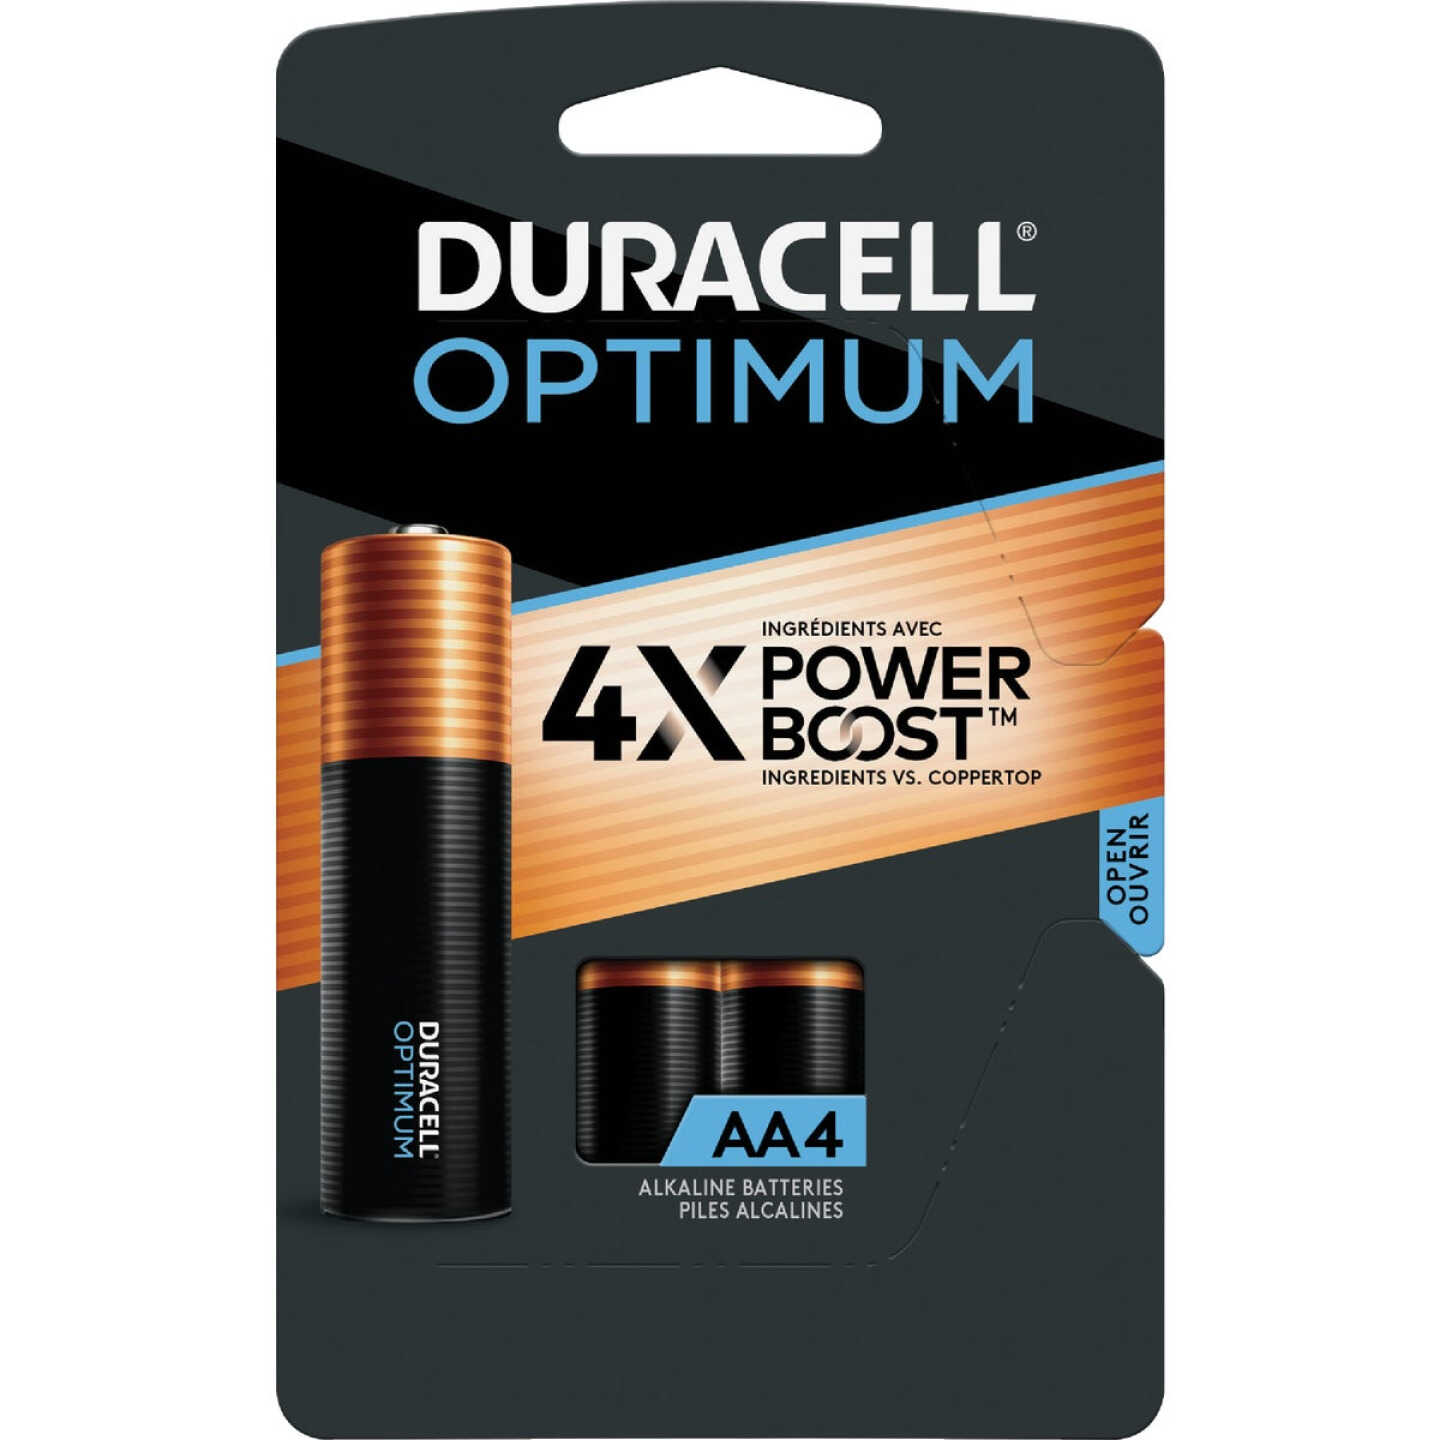 Duracell Coppertop Alkaline AA Battery Charger with 4 AA